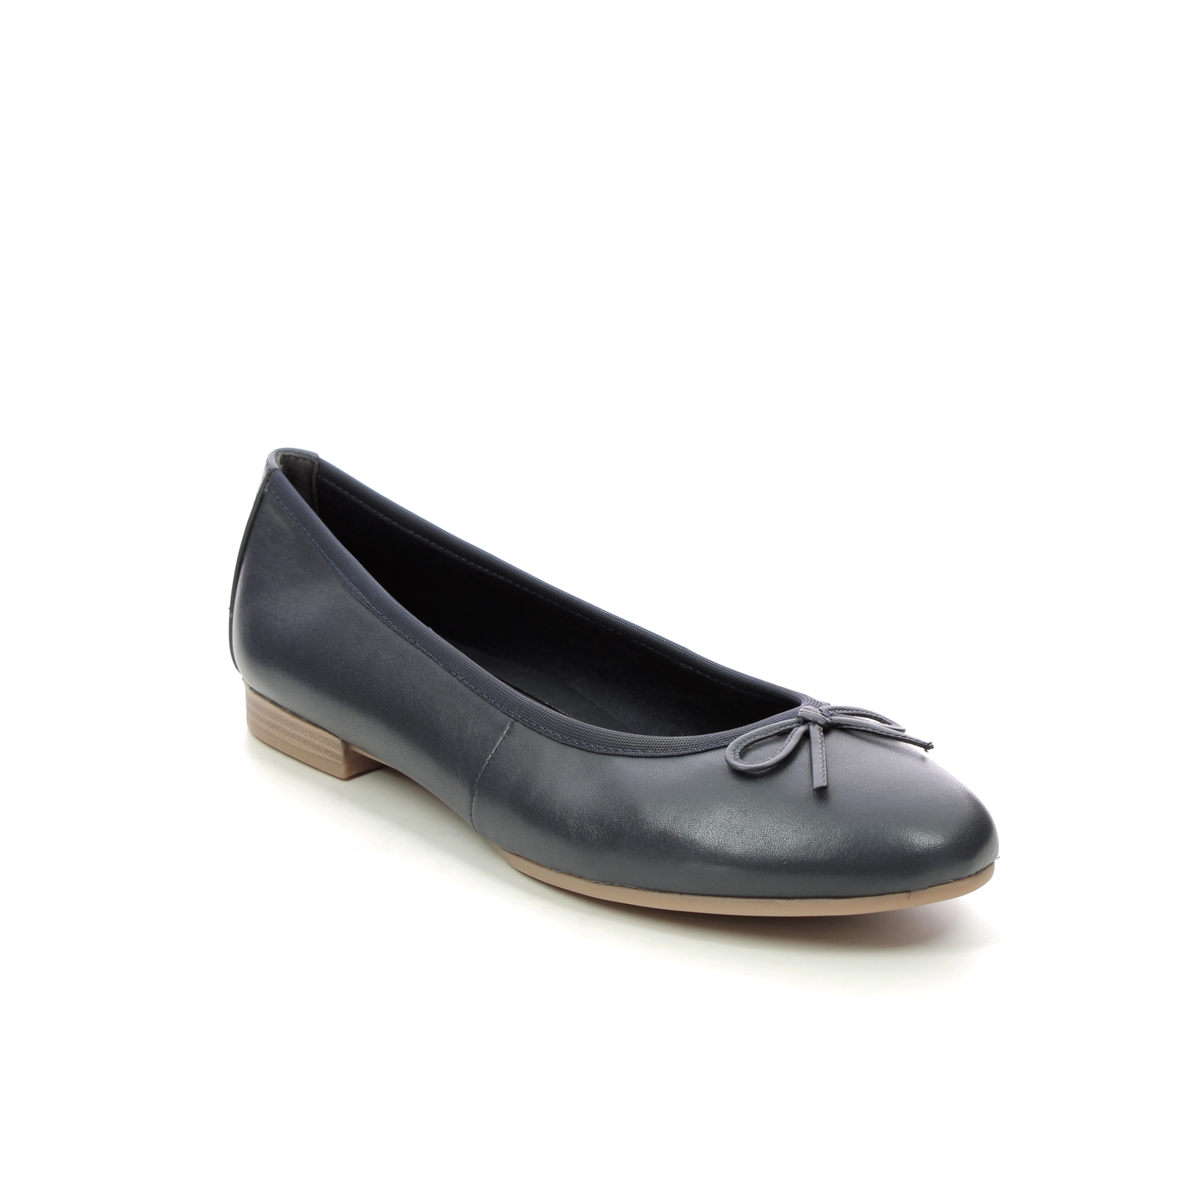 Tamaris Alena Birago Navy Leather Womens pumps 22116-20-805 in a Plain Leather in Size 41